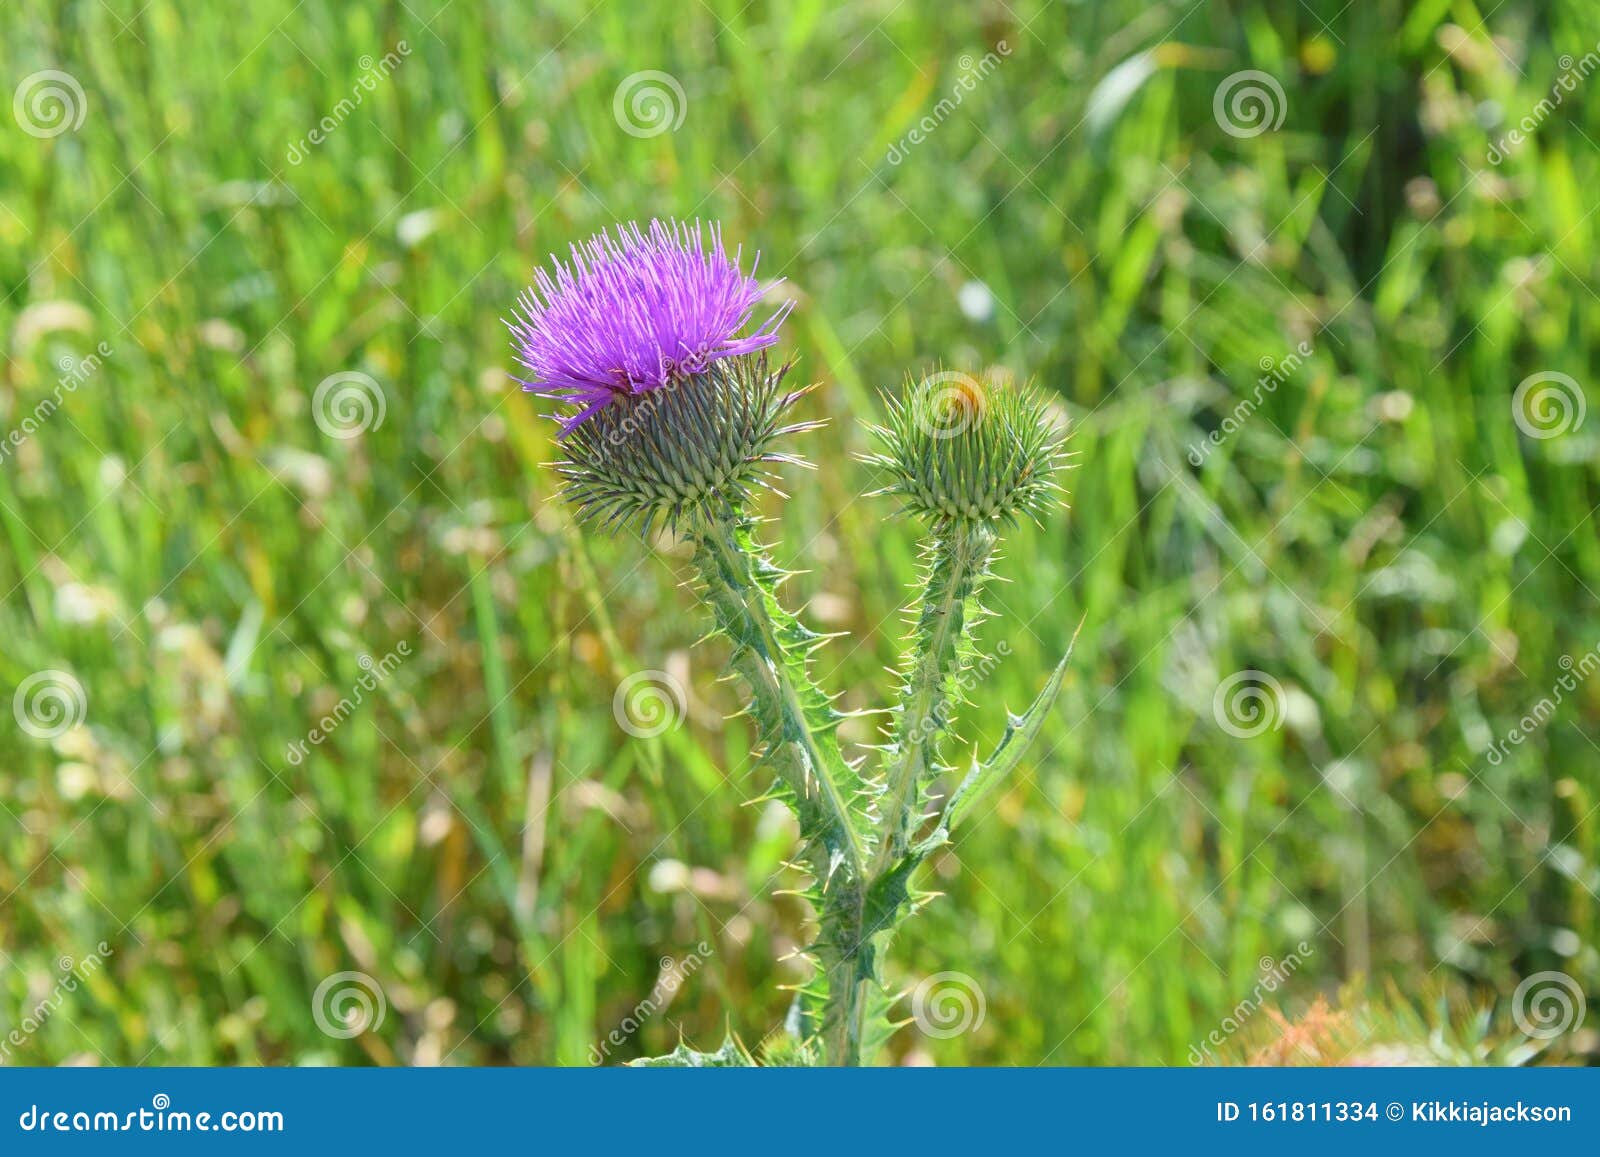 thistle carduus wild remedial flower in meadow